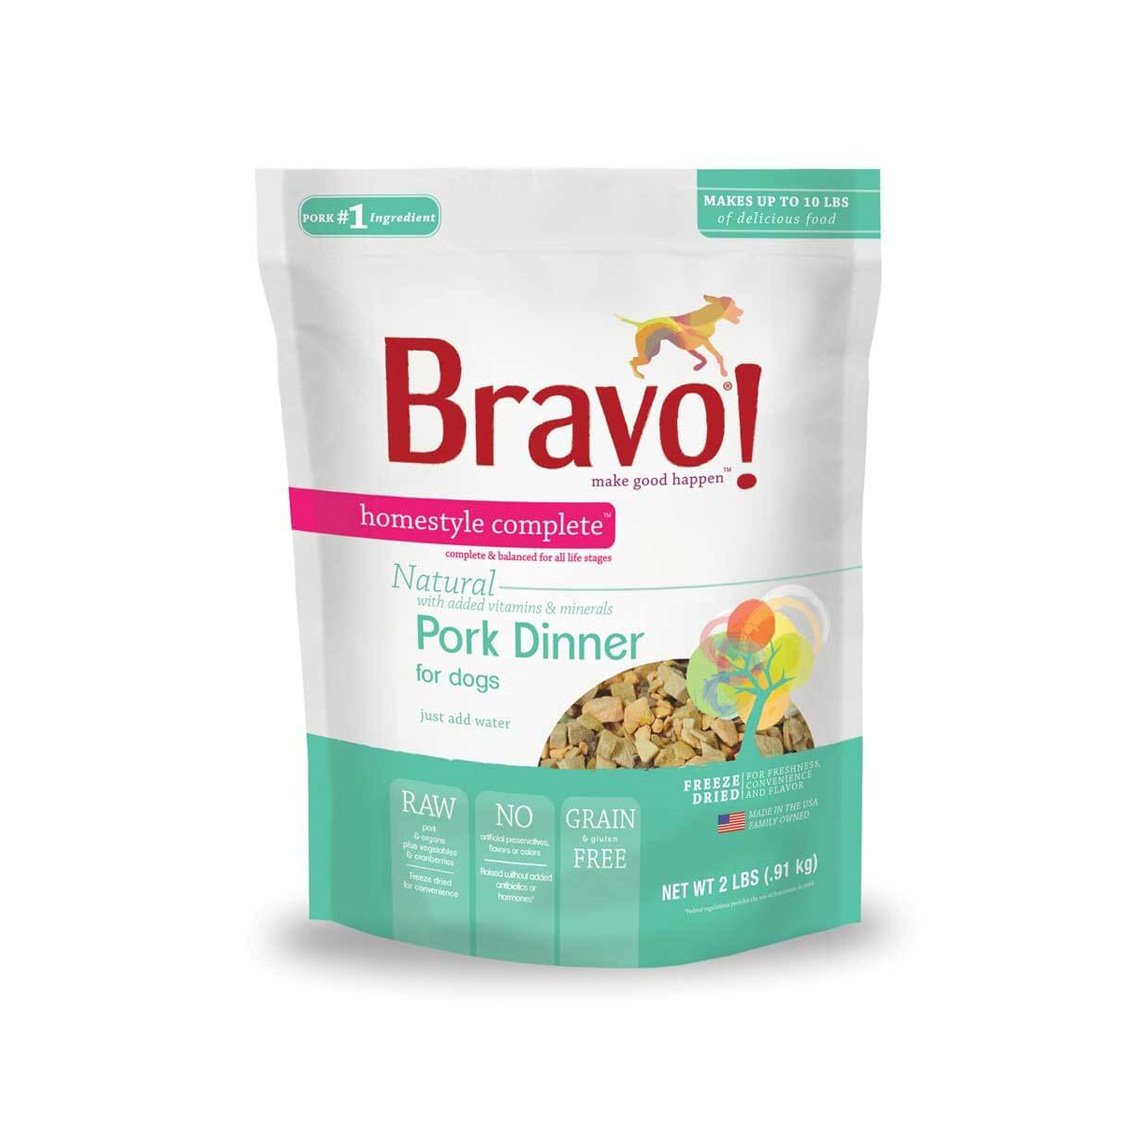 Bravo! Homestyle Complete Freeze-Dried Raw Grain-Free Dog Food | Only Natural Pet